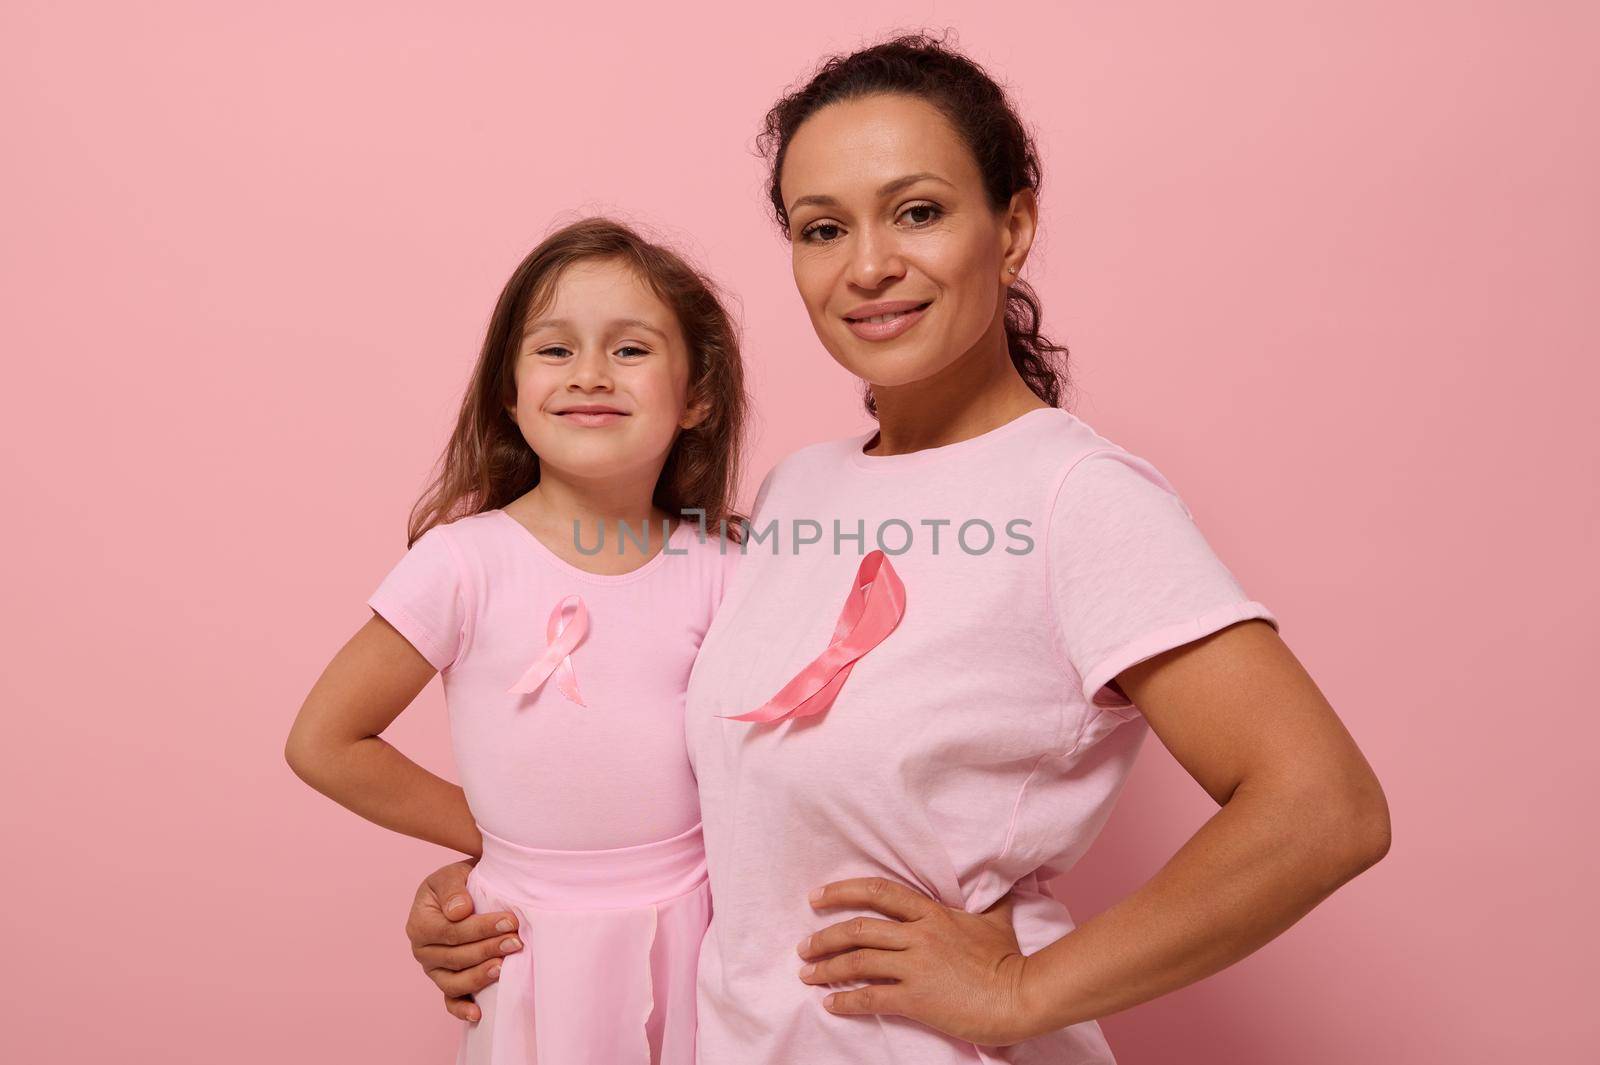 Gorgeous women of two generations, African American lady and European baby girl, in pink clothes and a ribbon, support cancer survivors. Medical Concept October 1. World Breast Cancer Awareness Day by artgf